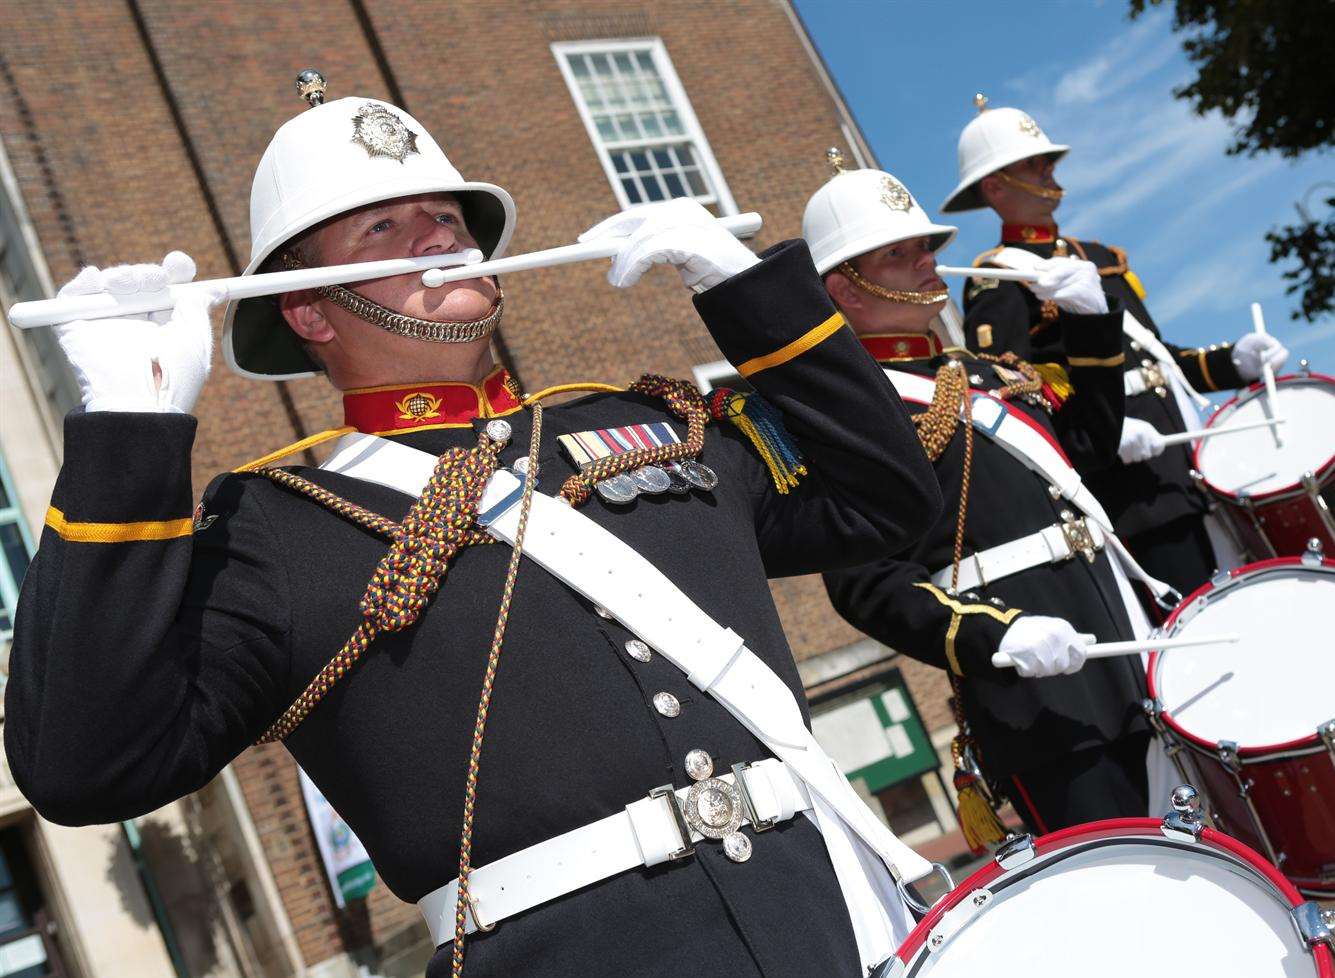 The Royal Marines Band play on the steps of the Town Hall as Mayor of Tunbridge Wells, Councillor Julian Stanyer meets members of Her Majesty's Royal Marines